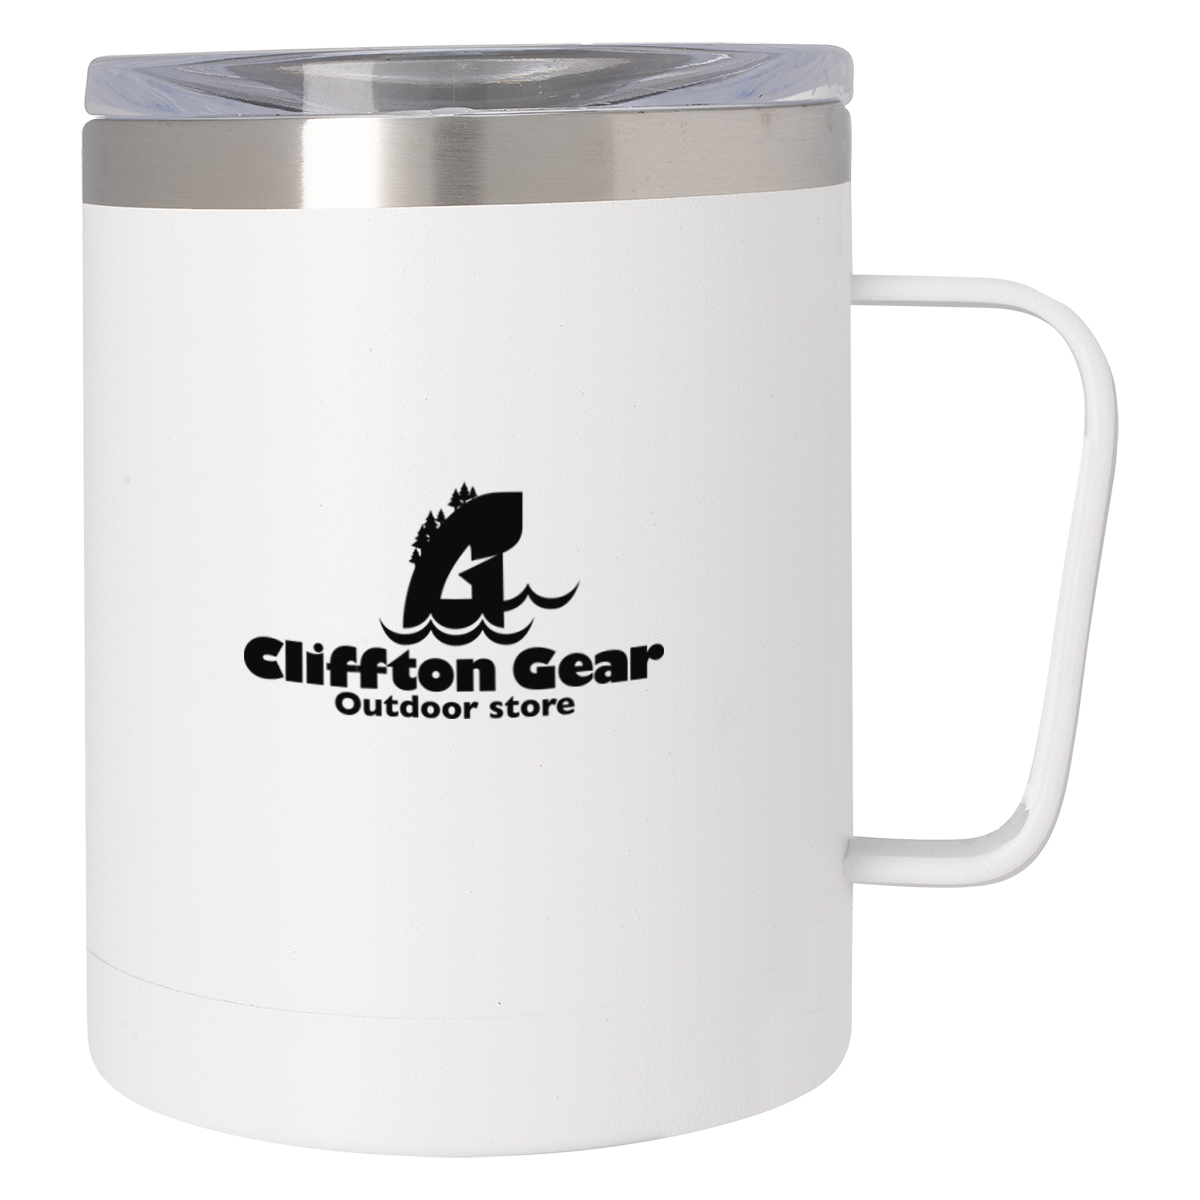 #5392 - 12 Oz. Concord Mug - Hit Promotional Products